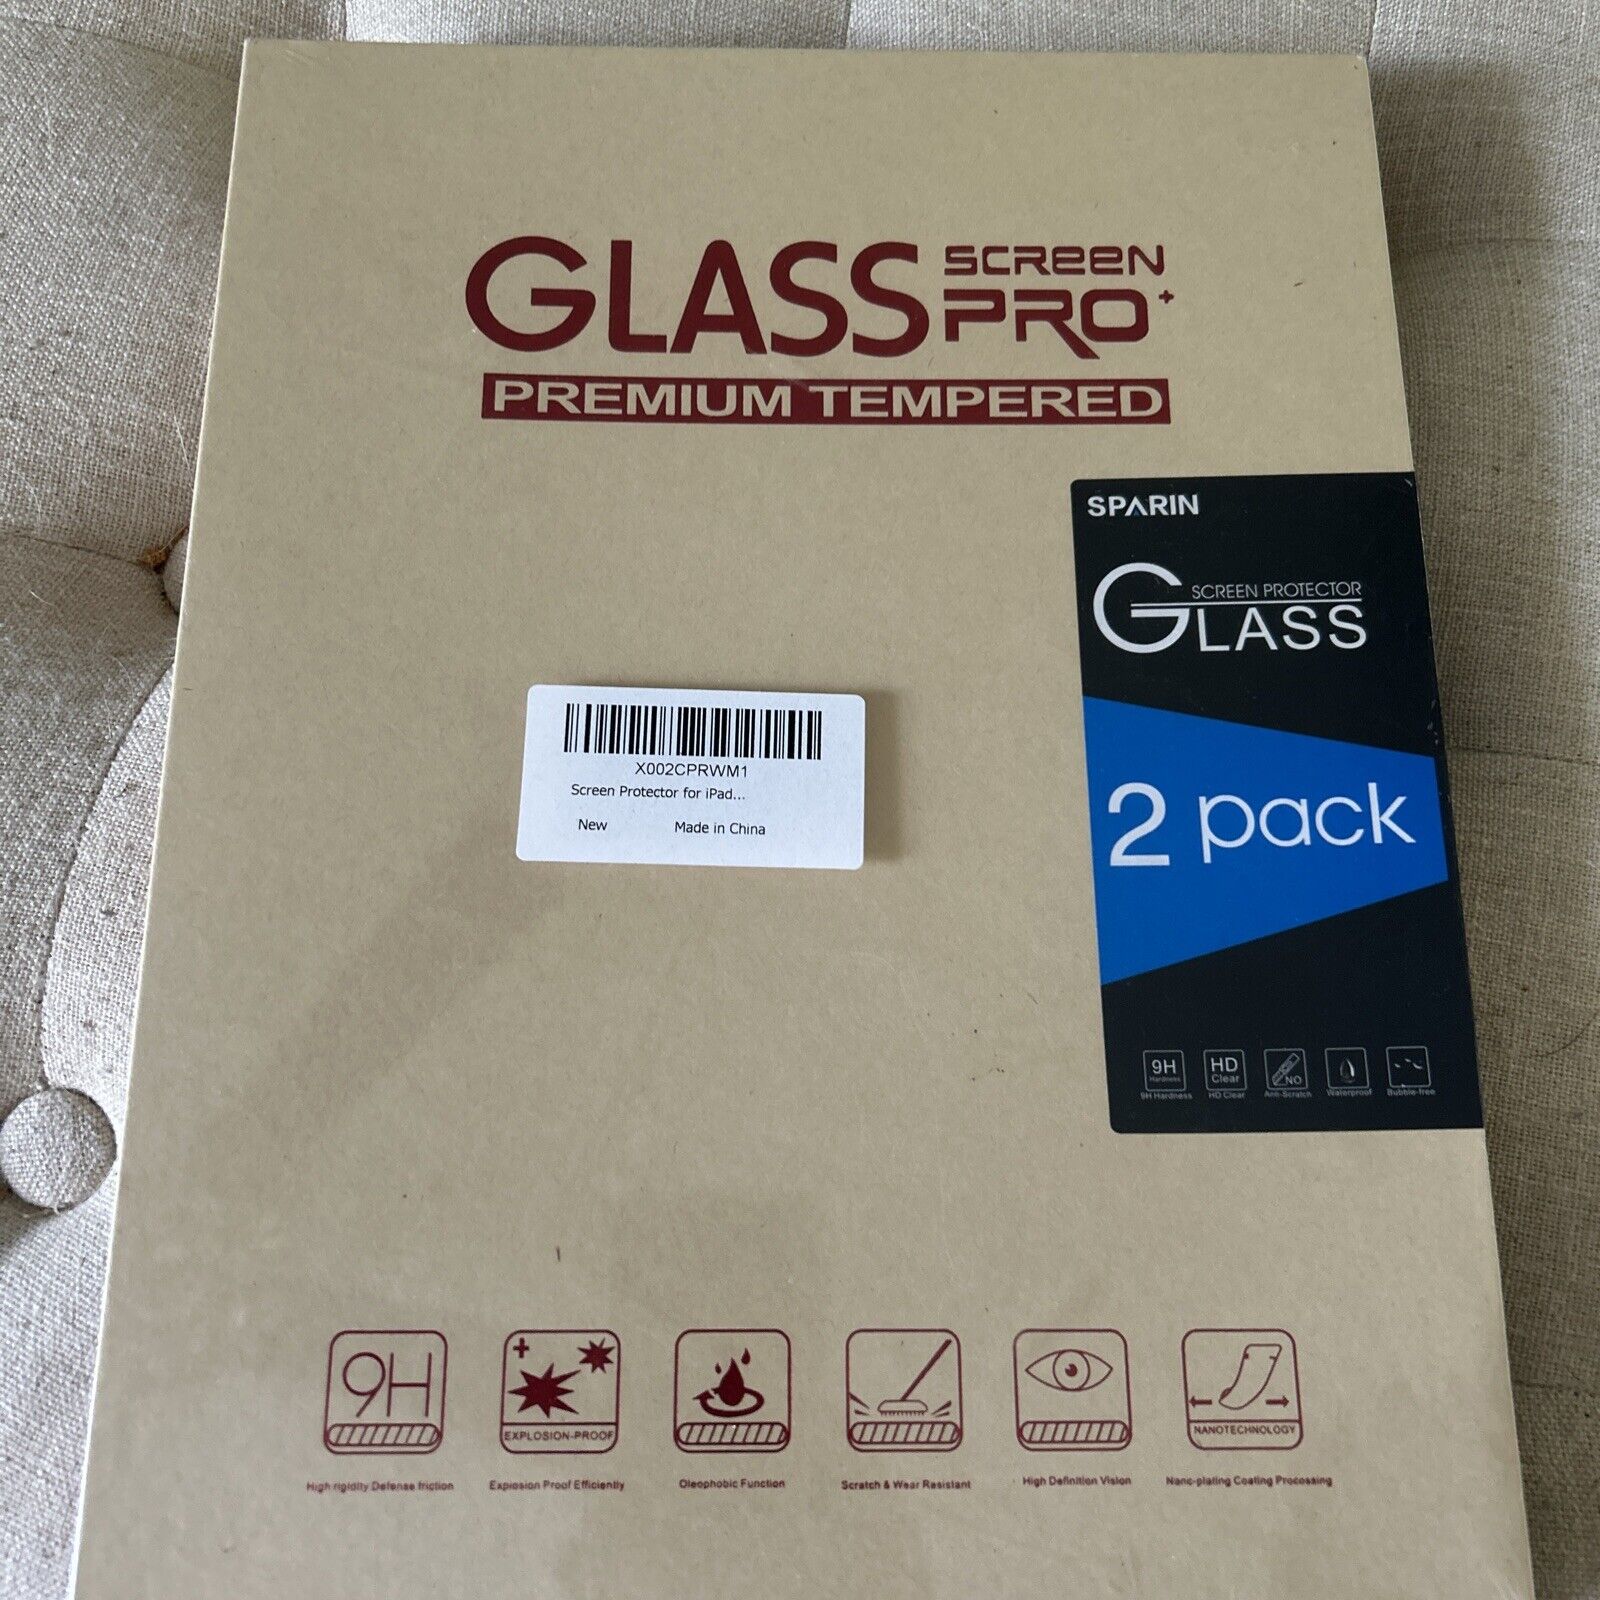 2-Pack Sparin Glass Screen Pro+ Premium Tempered Screen Protector for iPad